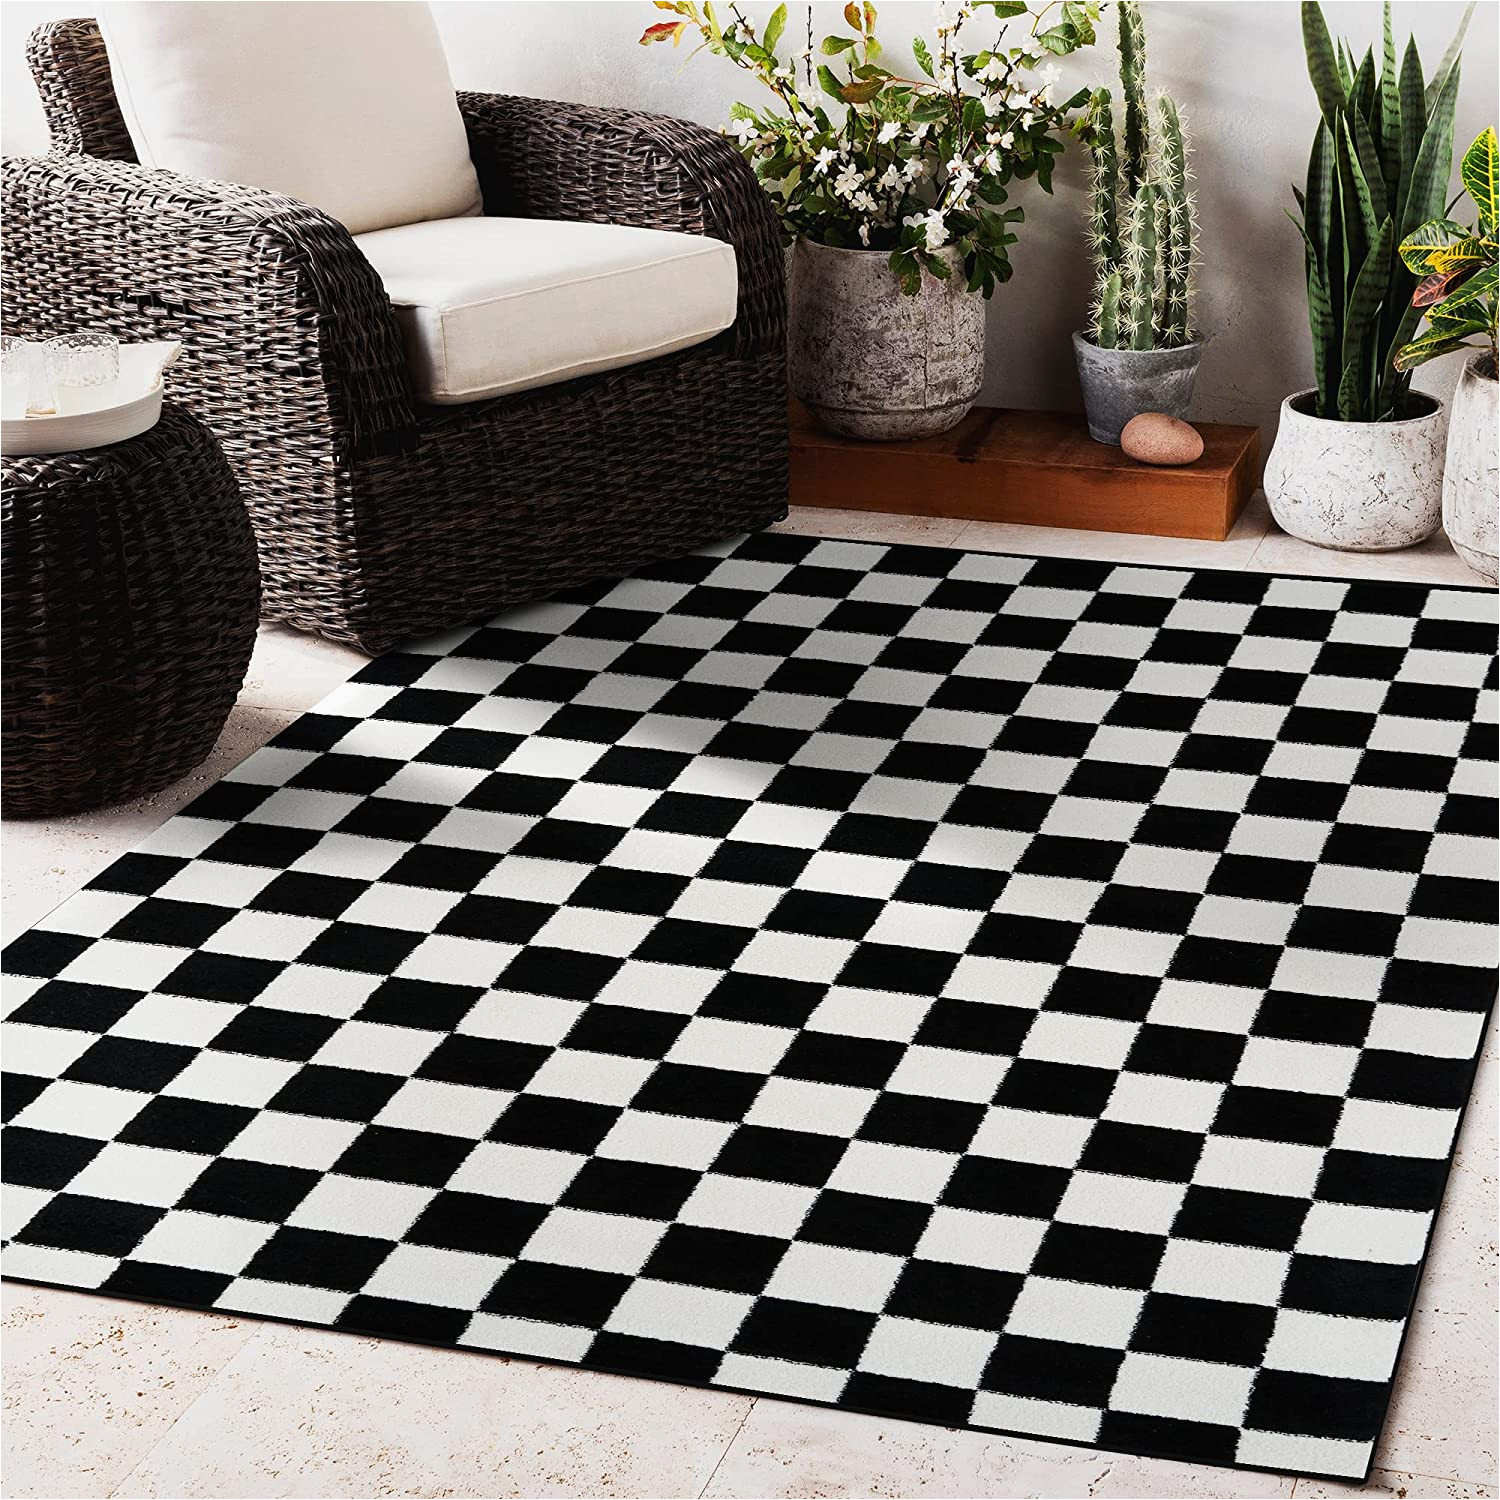 7 Feet by 7 Feet area Rugs Persian area Rugs Black 5×7 1909 Checkered White 5 X 7 area Rug Carpet, 5 Ft X 7 Ft